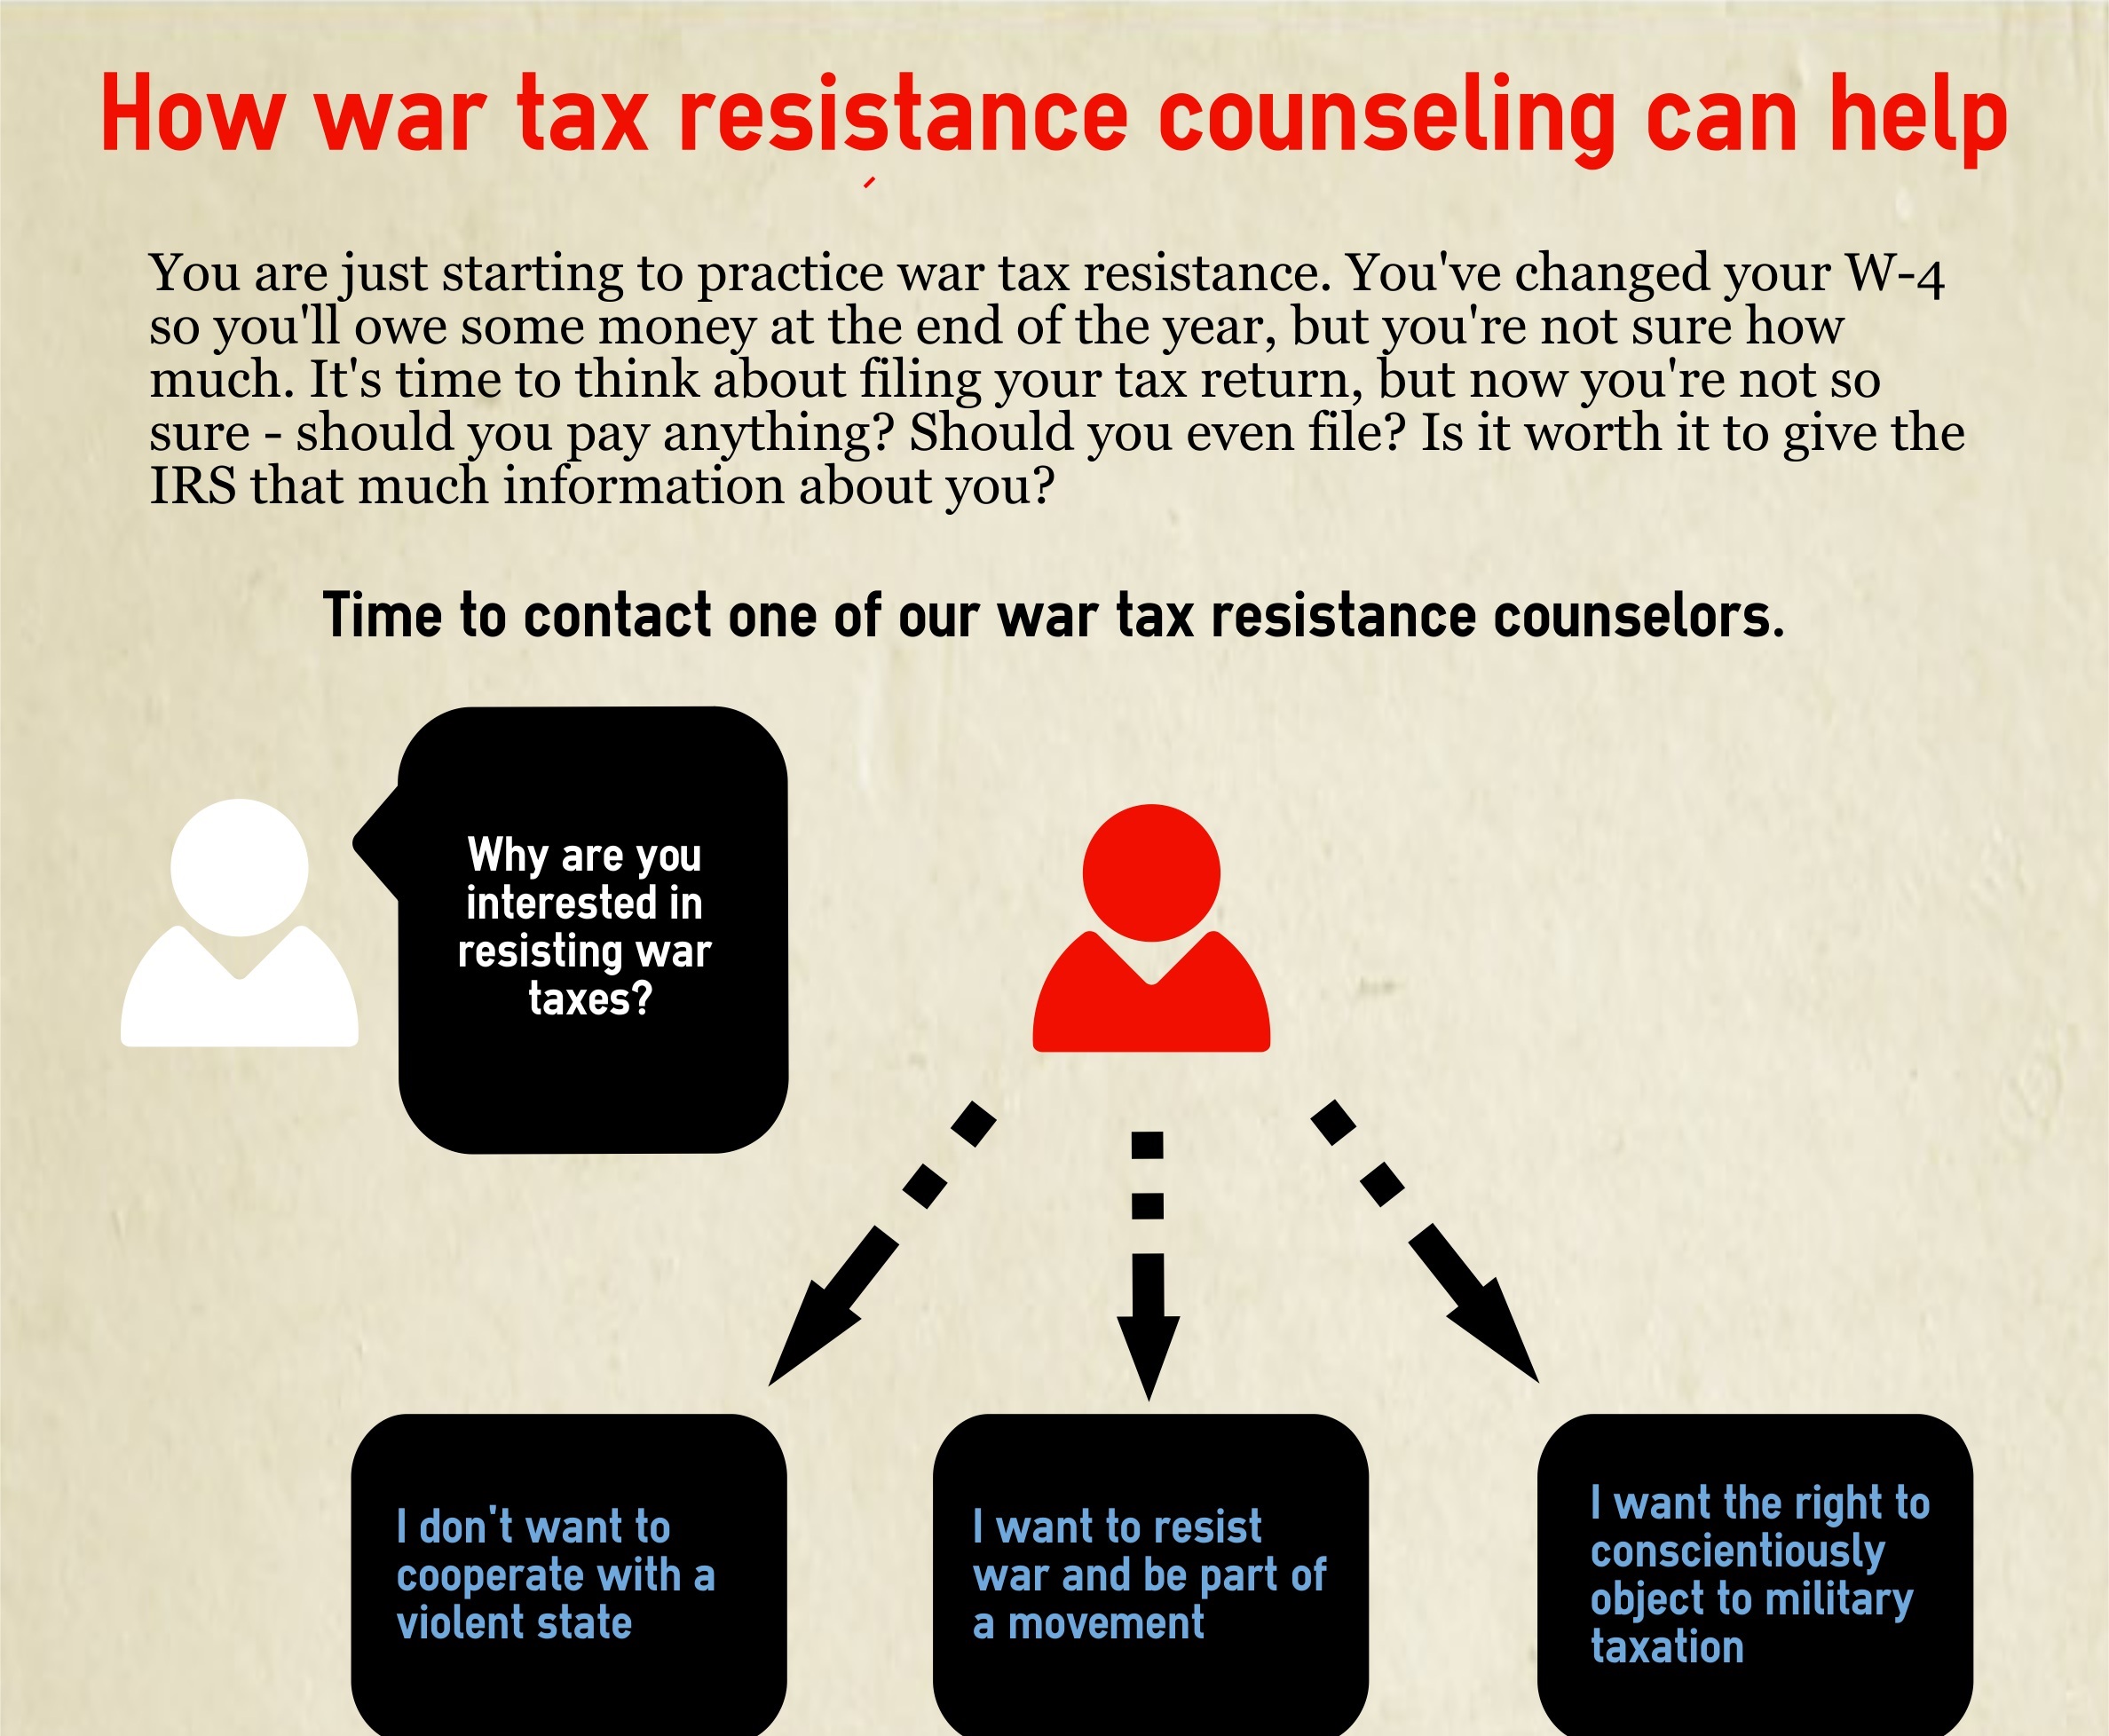 a draft of one potential infographic, called “How war tax resistance counseling can help,” with text of a dialogue with possible answers between a counselor and a war tax resister